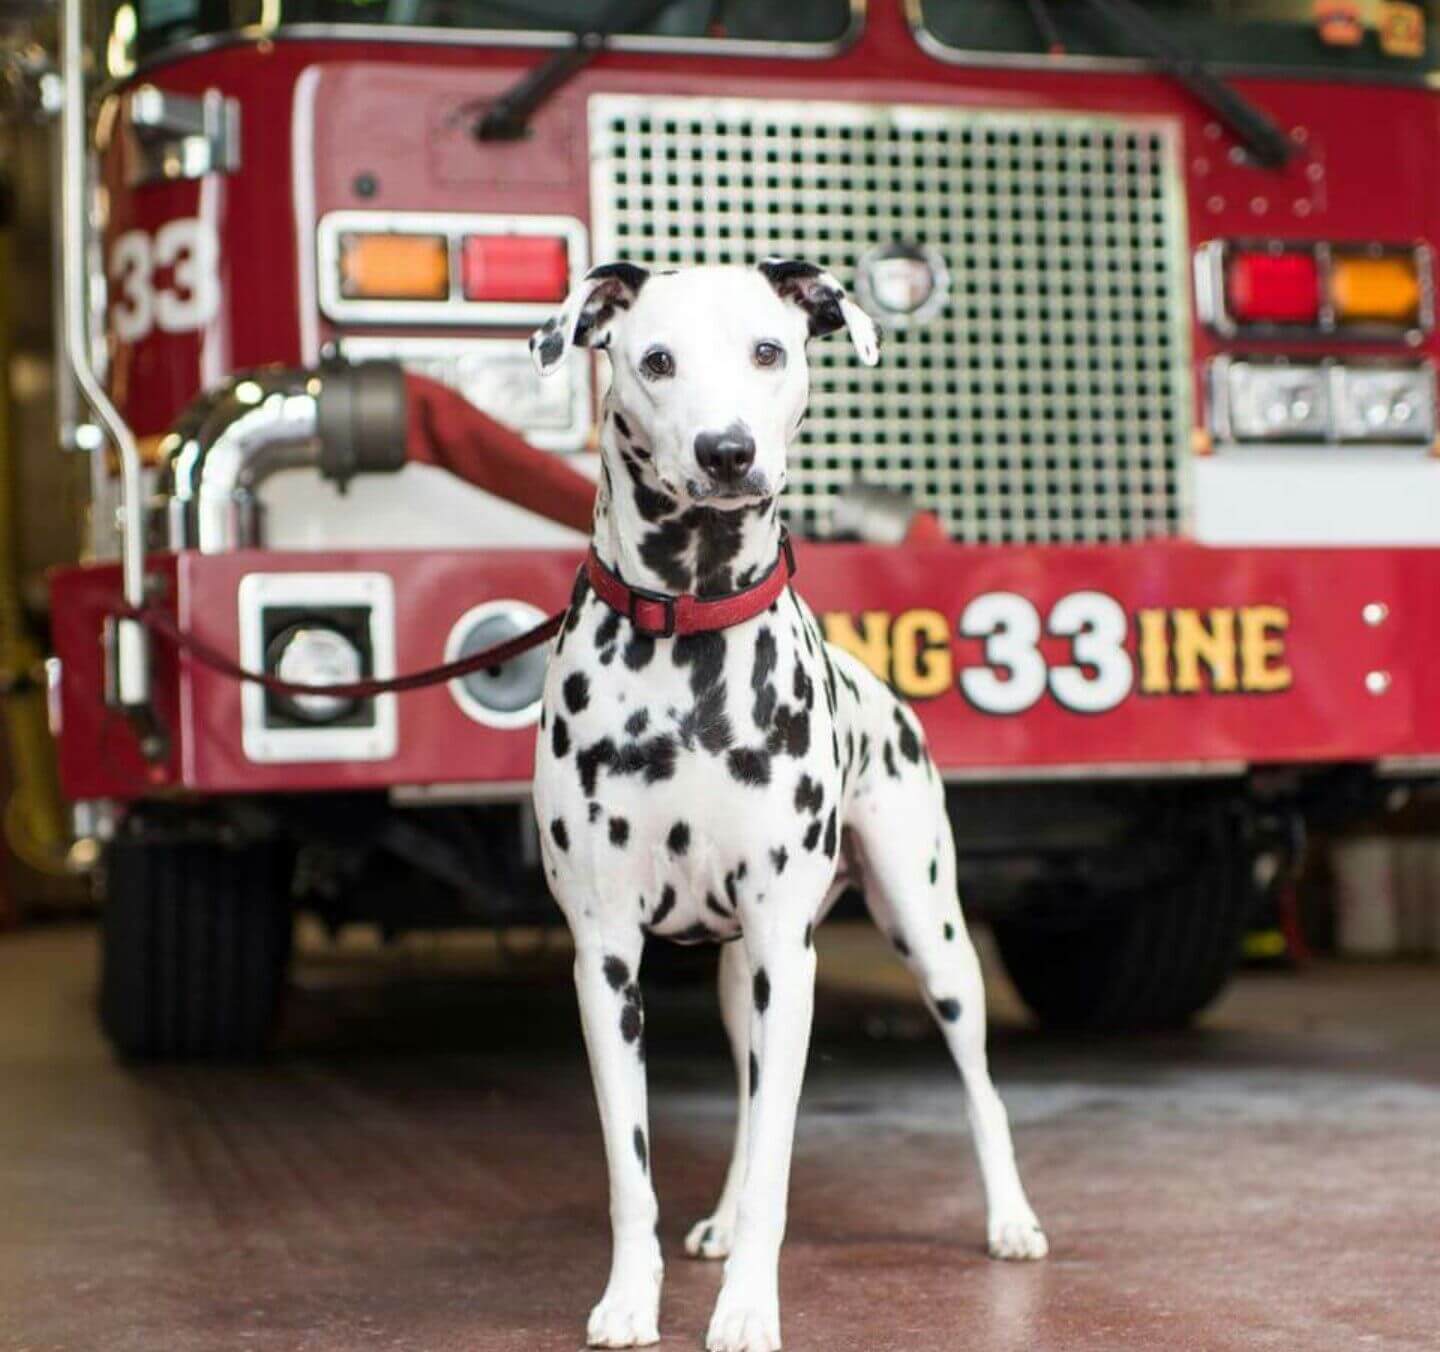 The History of Dalmatians as Fire Dogs